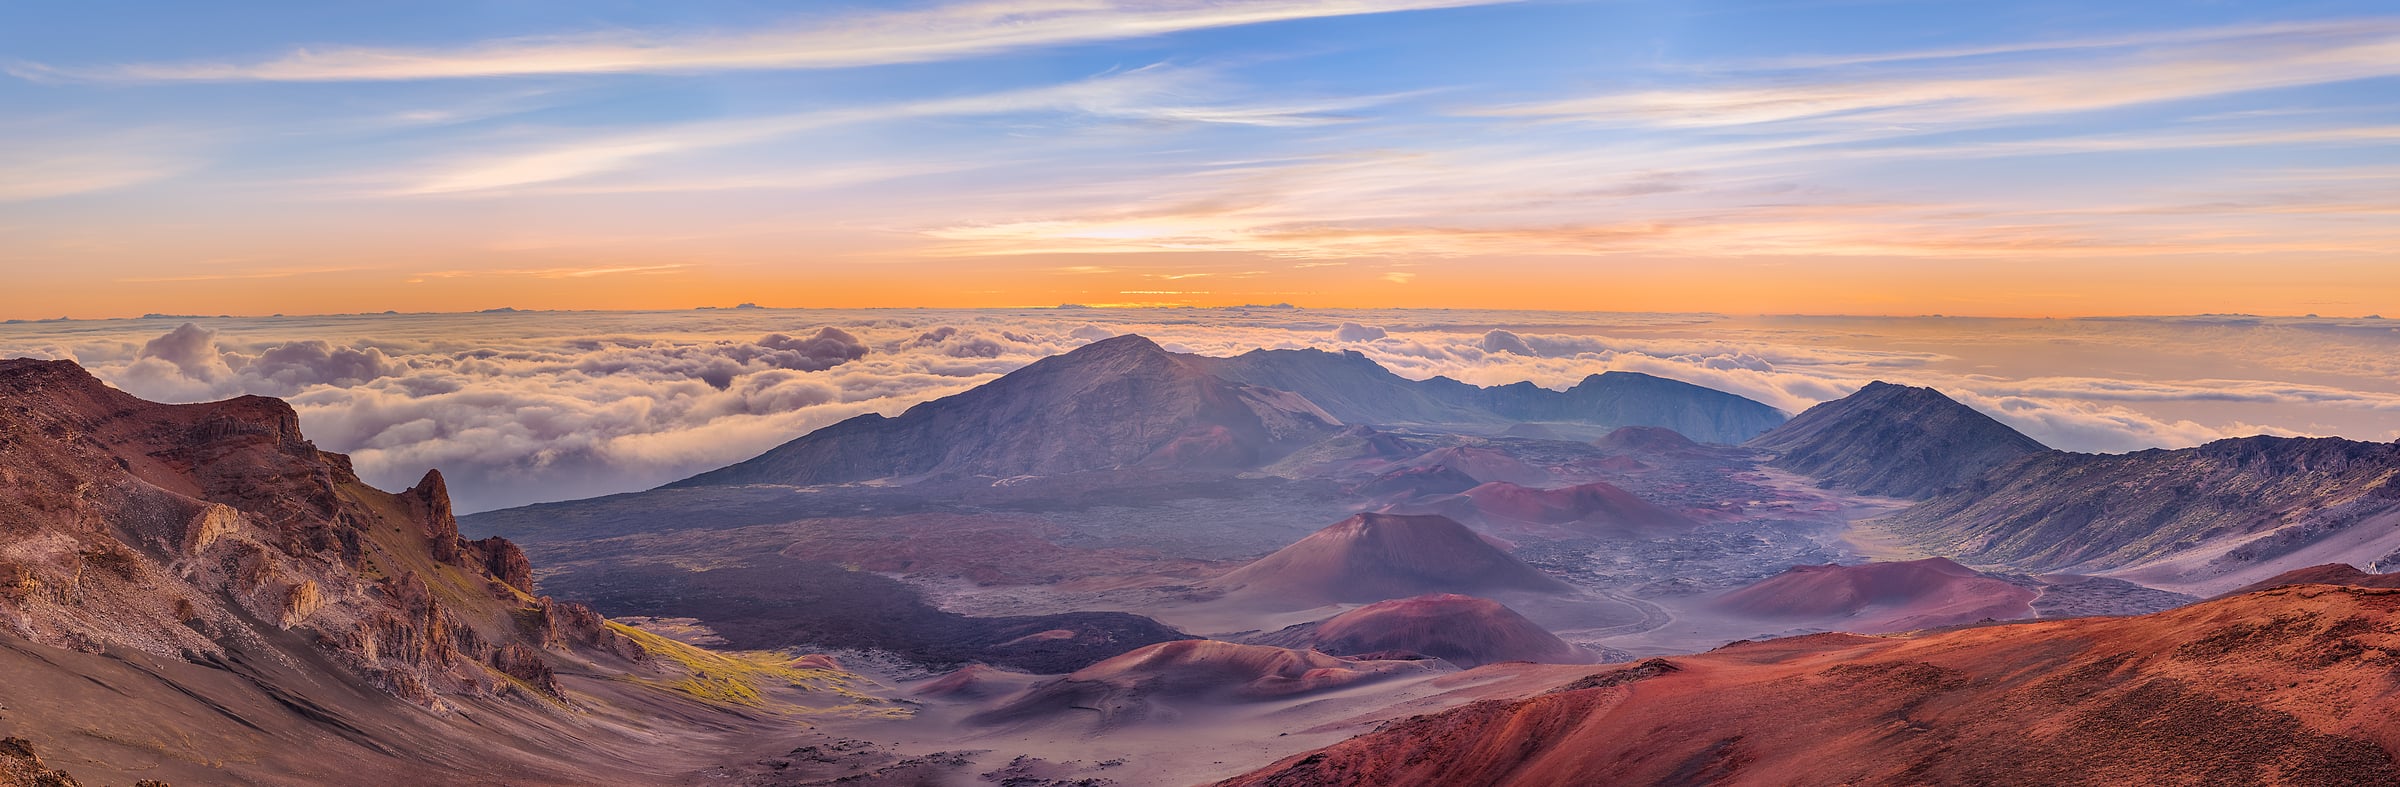 417 megapixels! An ultra high resolution, large-format VAST photo print of Haleakala National Park; landscape panorama photograph created by Chris Blake in Haleakala National Park, Hawaii.